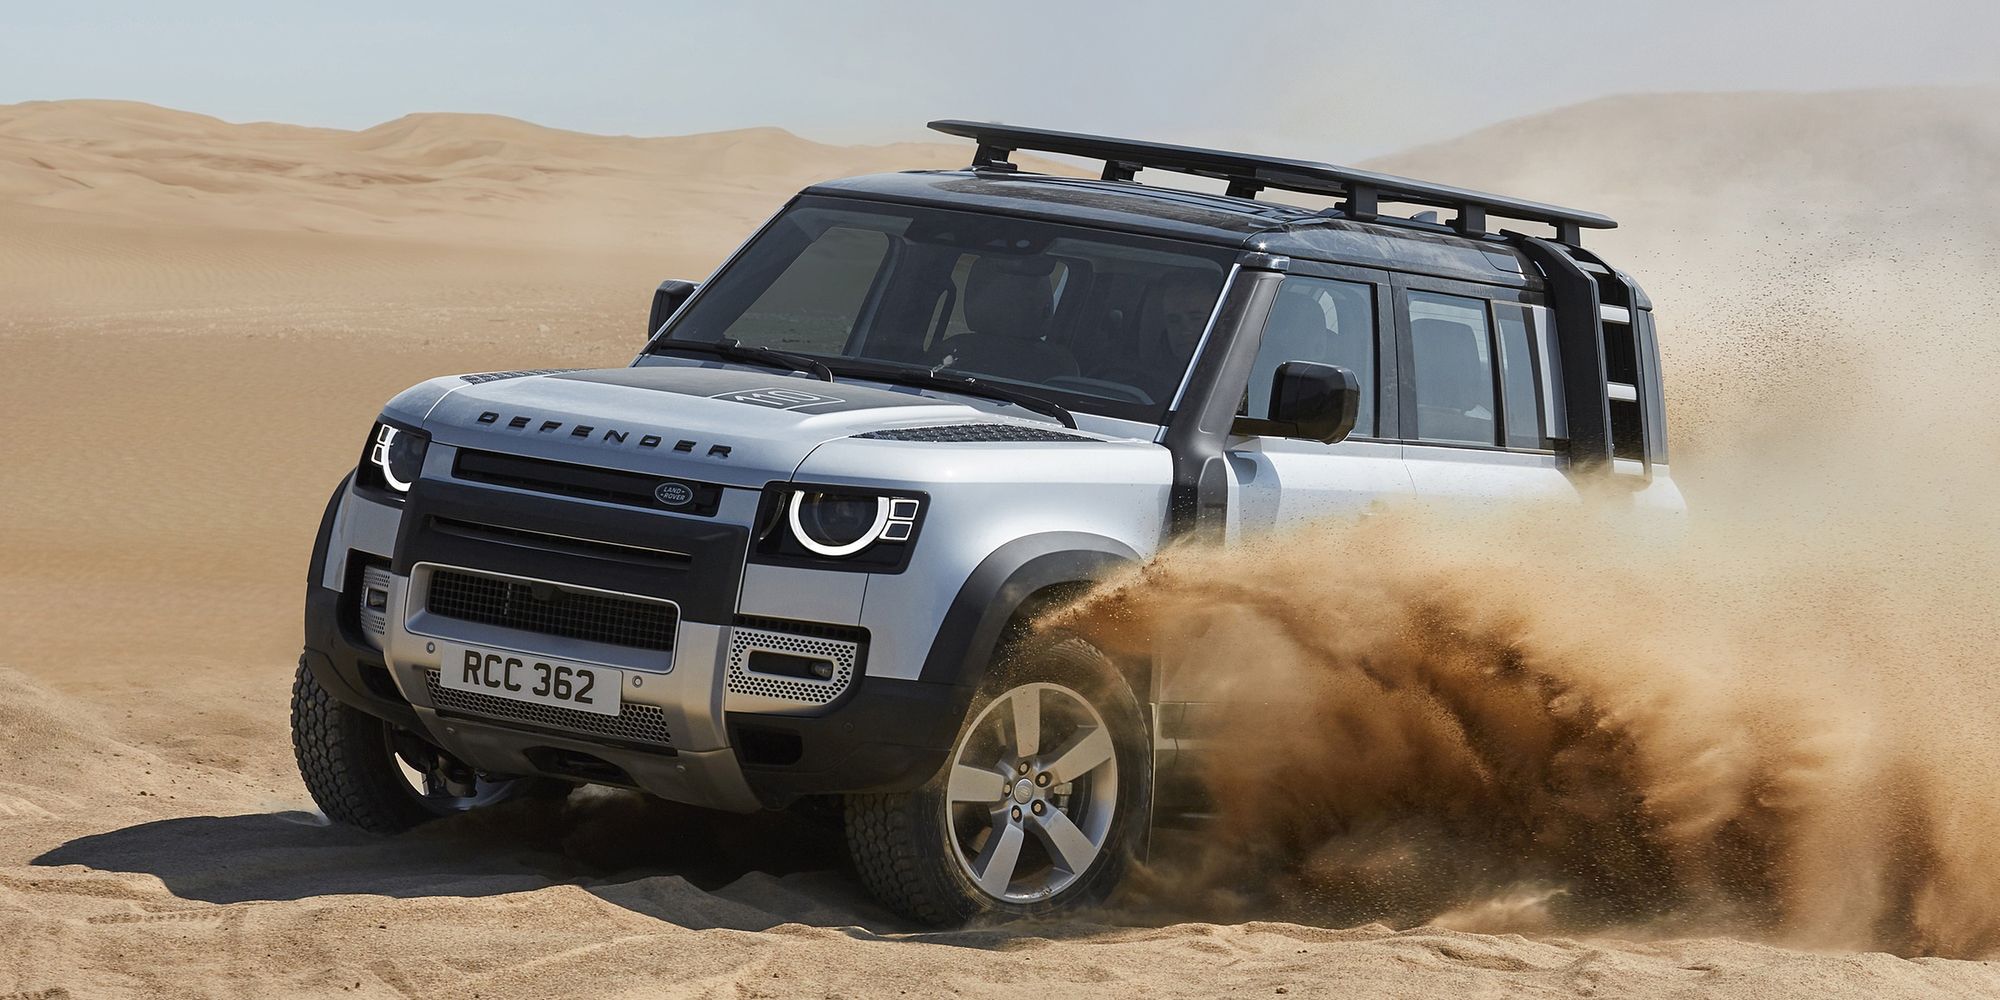 The front of the new Defender in the sand